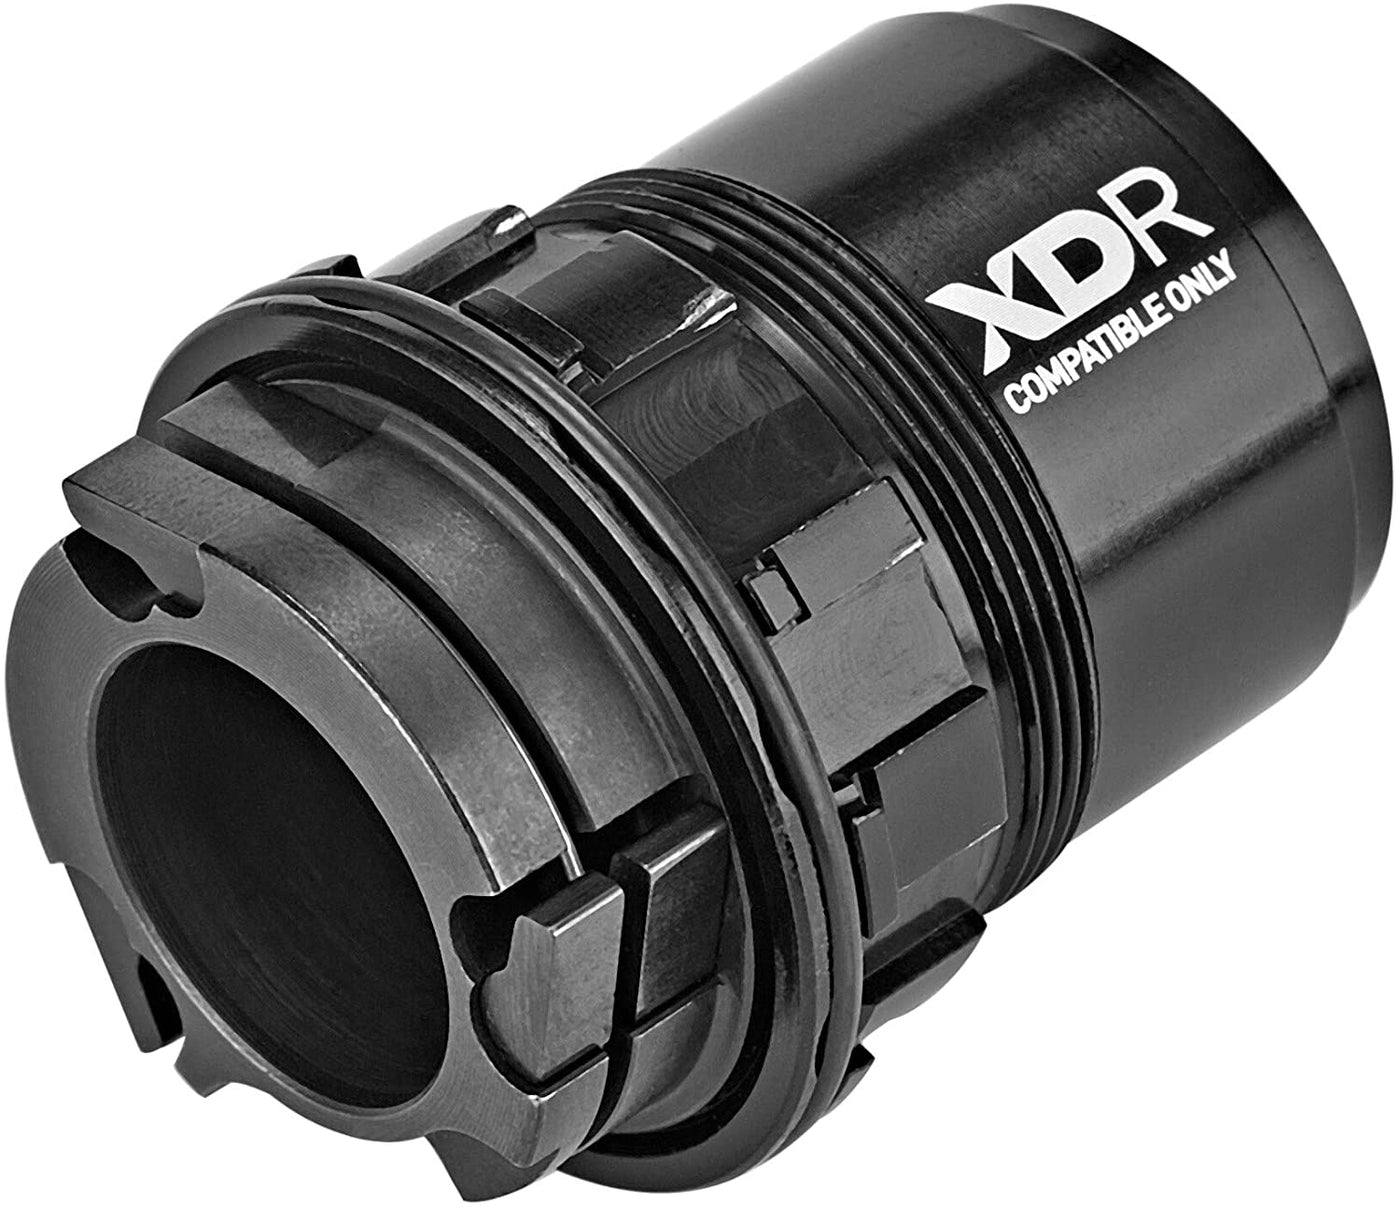 Minoura Freehub XDR Body For Kagura Direct Drive Trainer - Cyclop.in